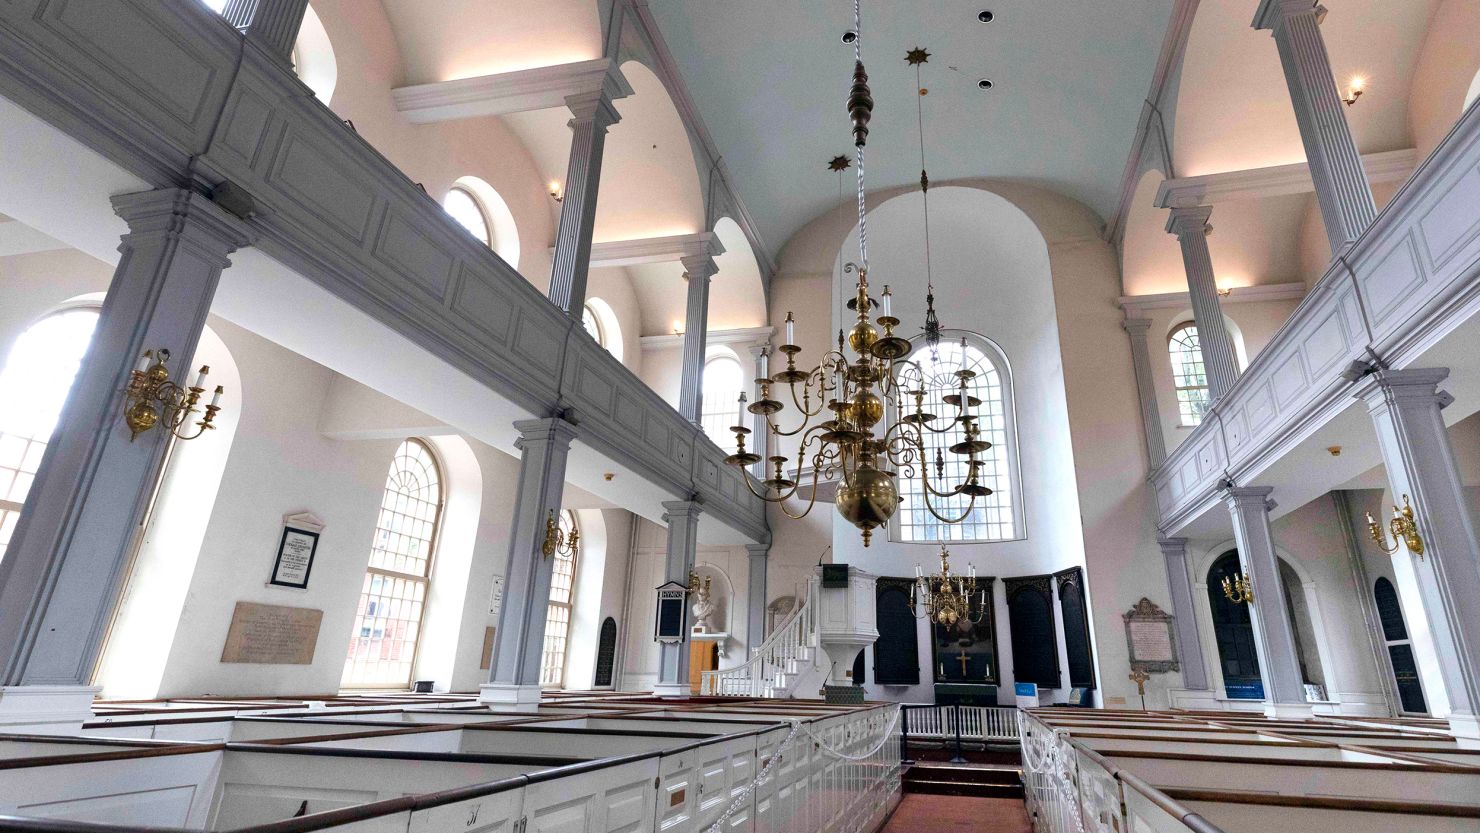 The interior of the historic Old North Church. It's famous as the place where in 1775 two lanterns in the steeple signaled that the British were heading to Concord and Lexington, but it's not well known that some of the church's early congregants were slaveholders. 